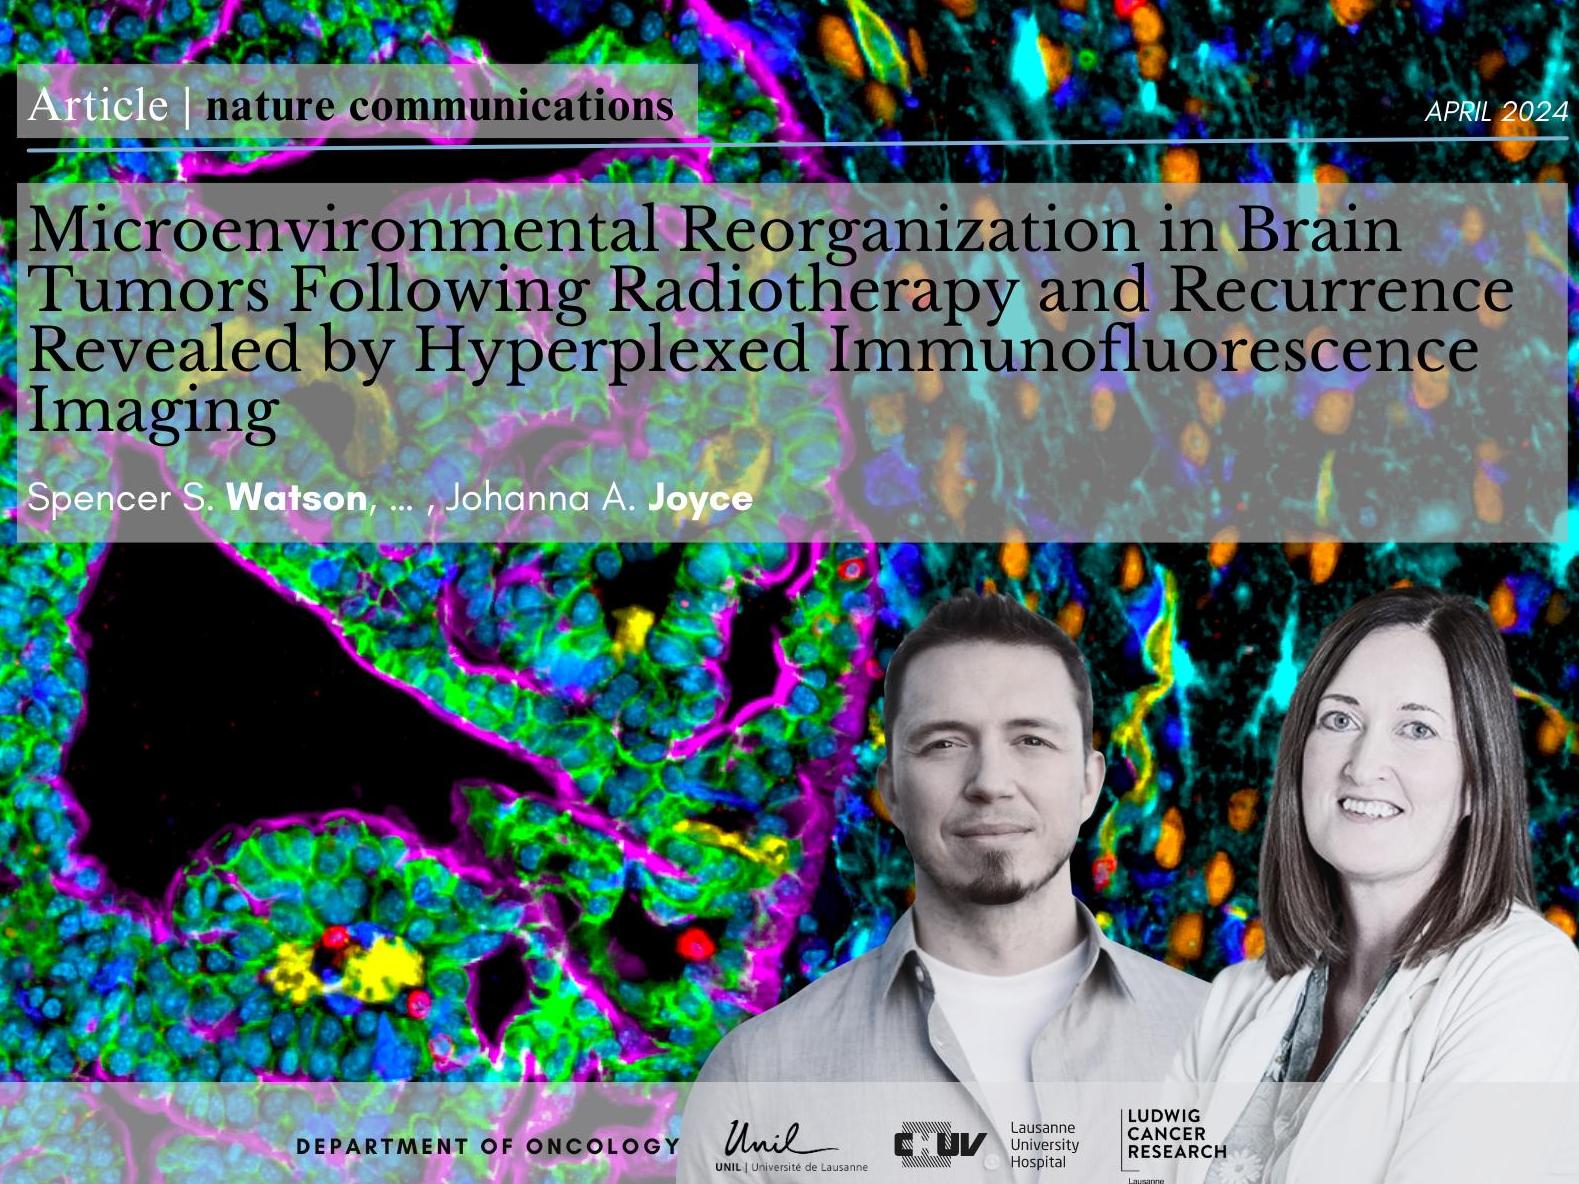 Microenvironmental Reorganization in Brain Tumors Following Radiotherapy and Recurrence Revealed by Hyperplexed Immunofluorescence Imaging (HIFI)
